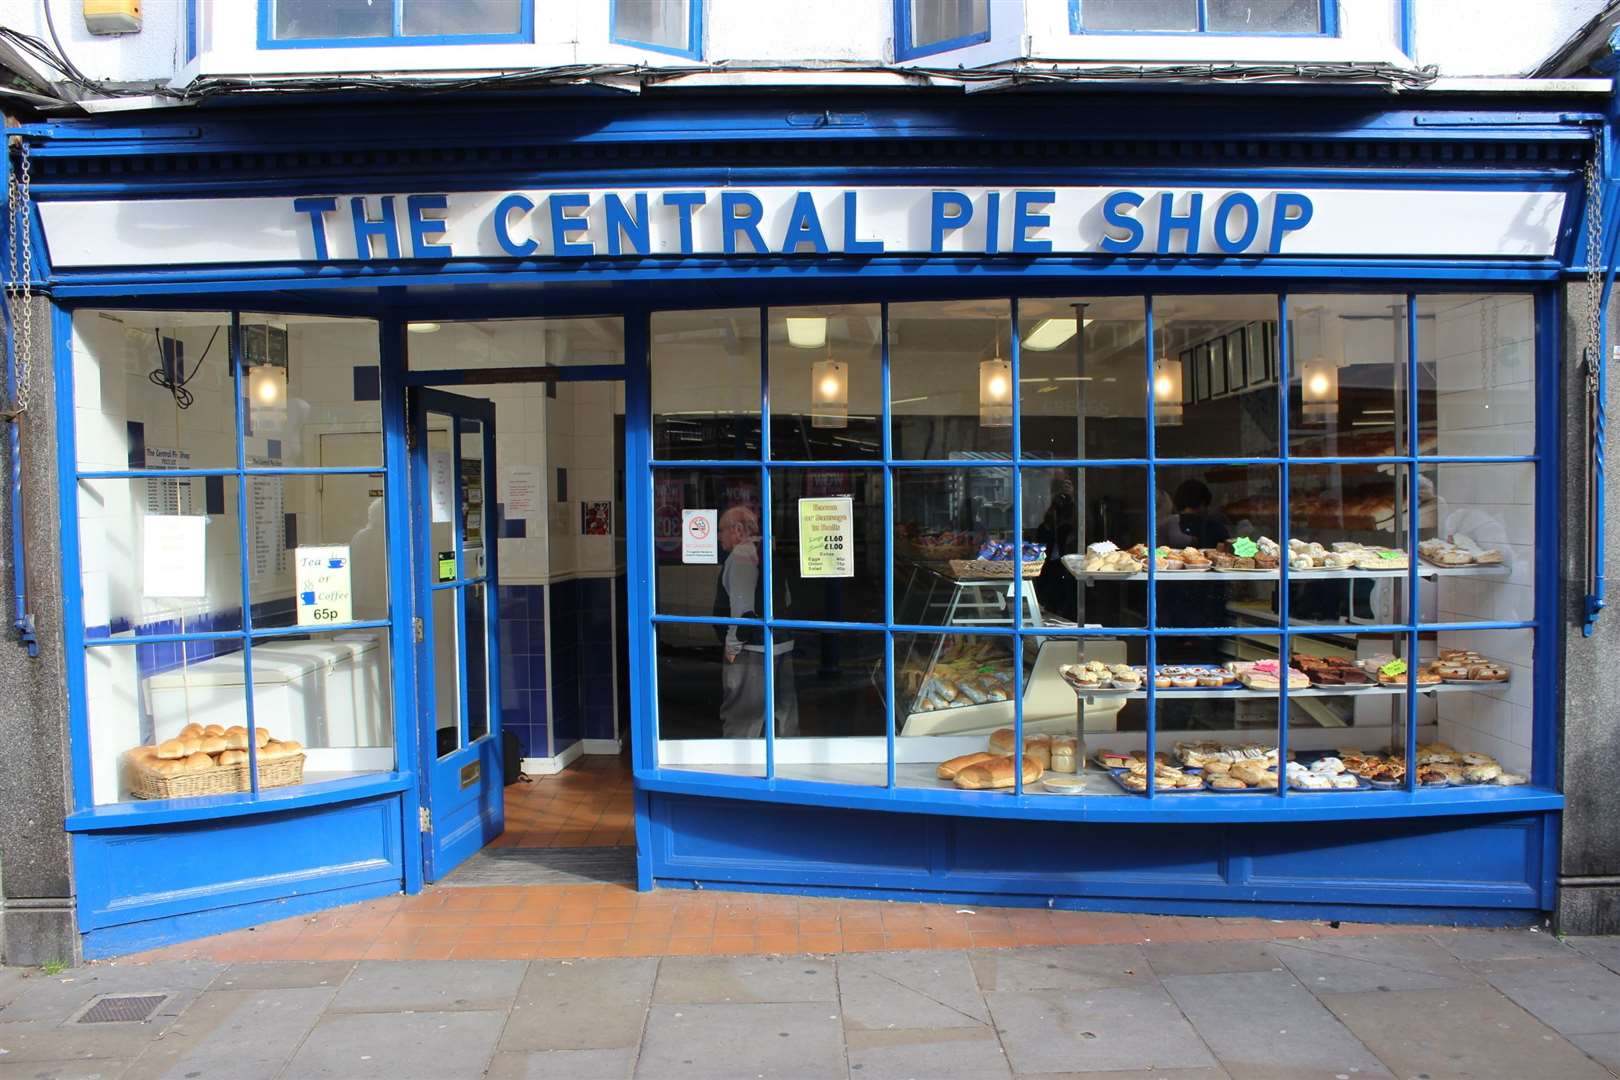 The Central Pie Shop in Sheerness